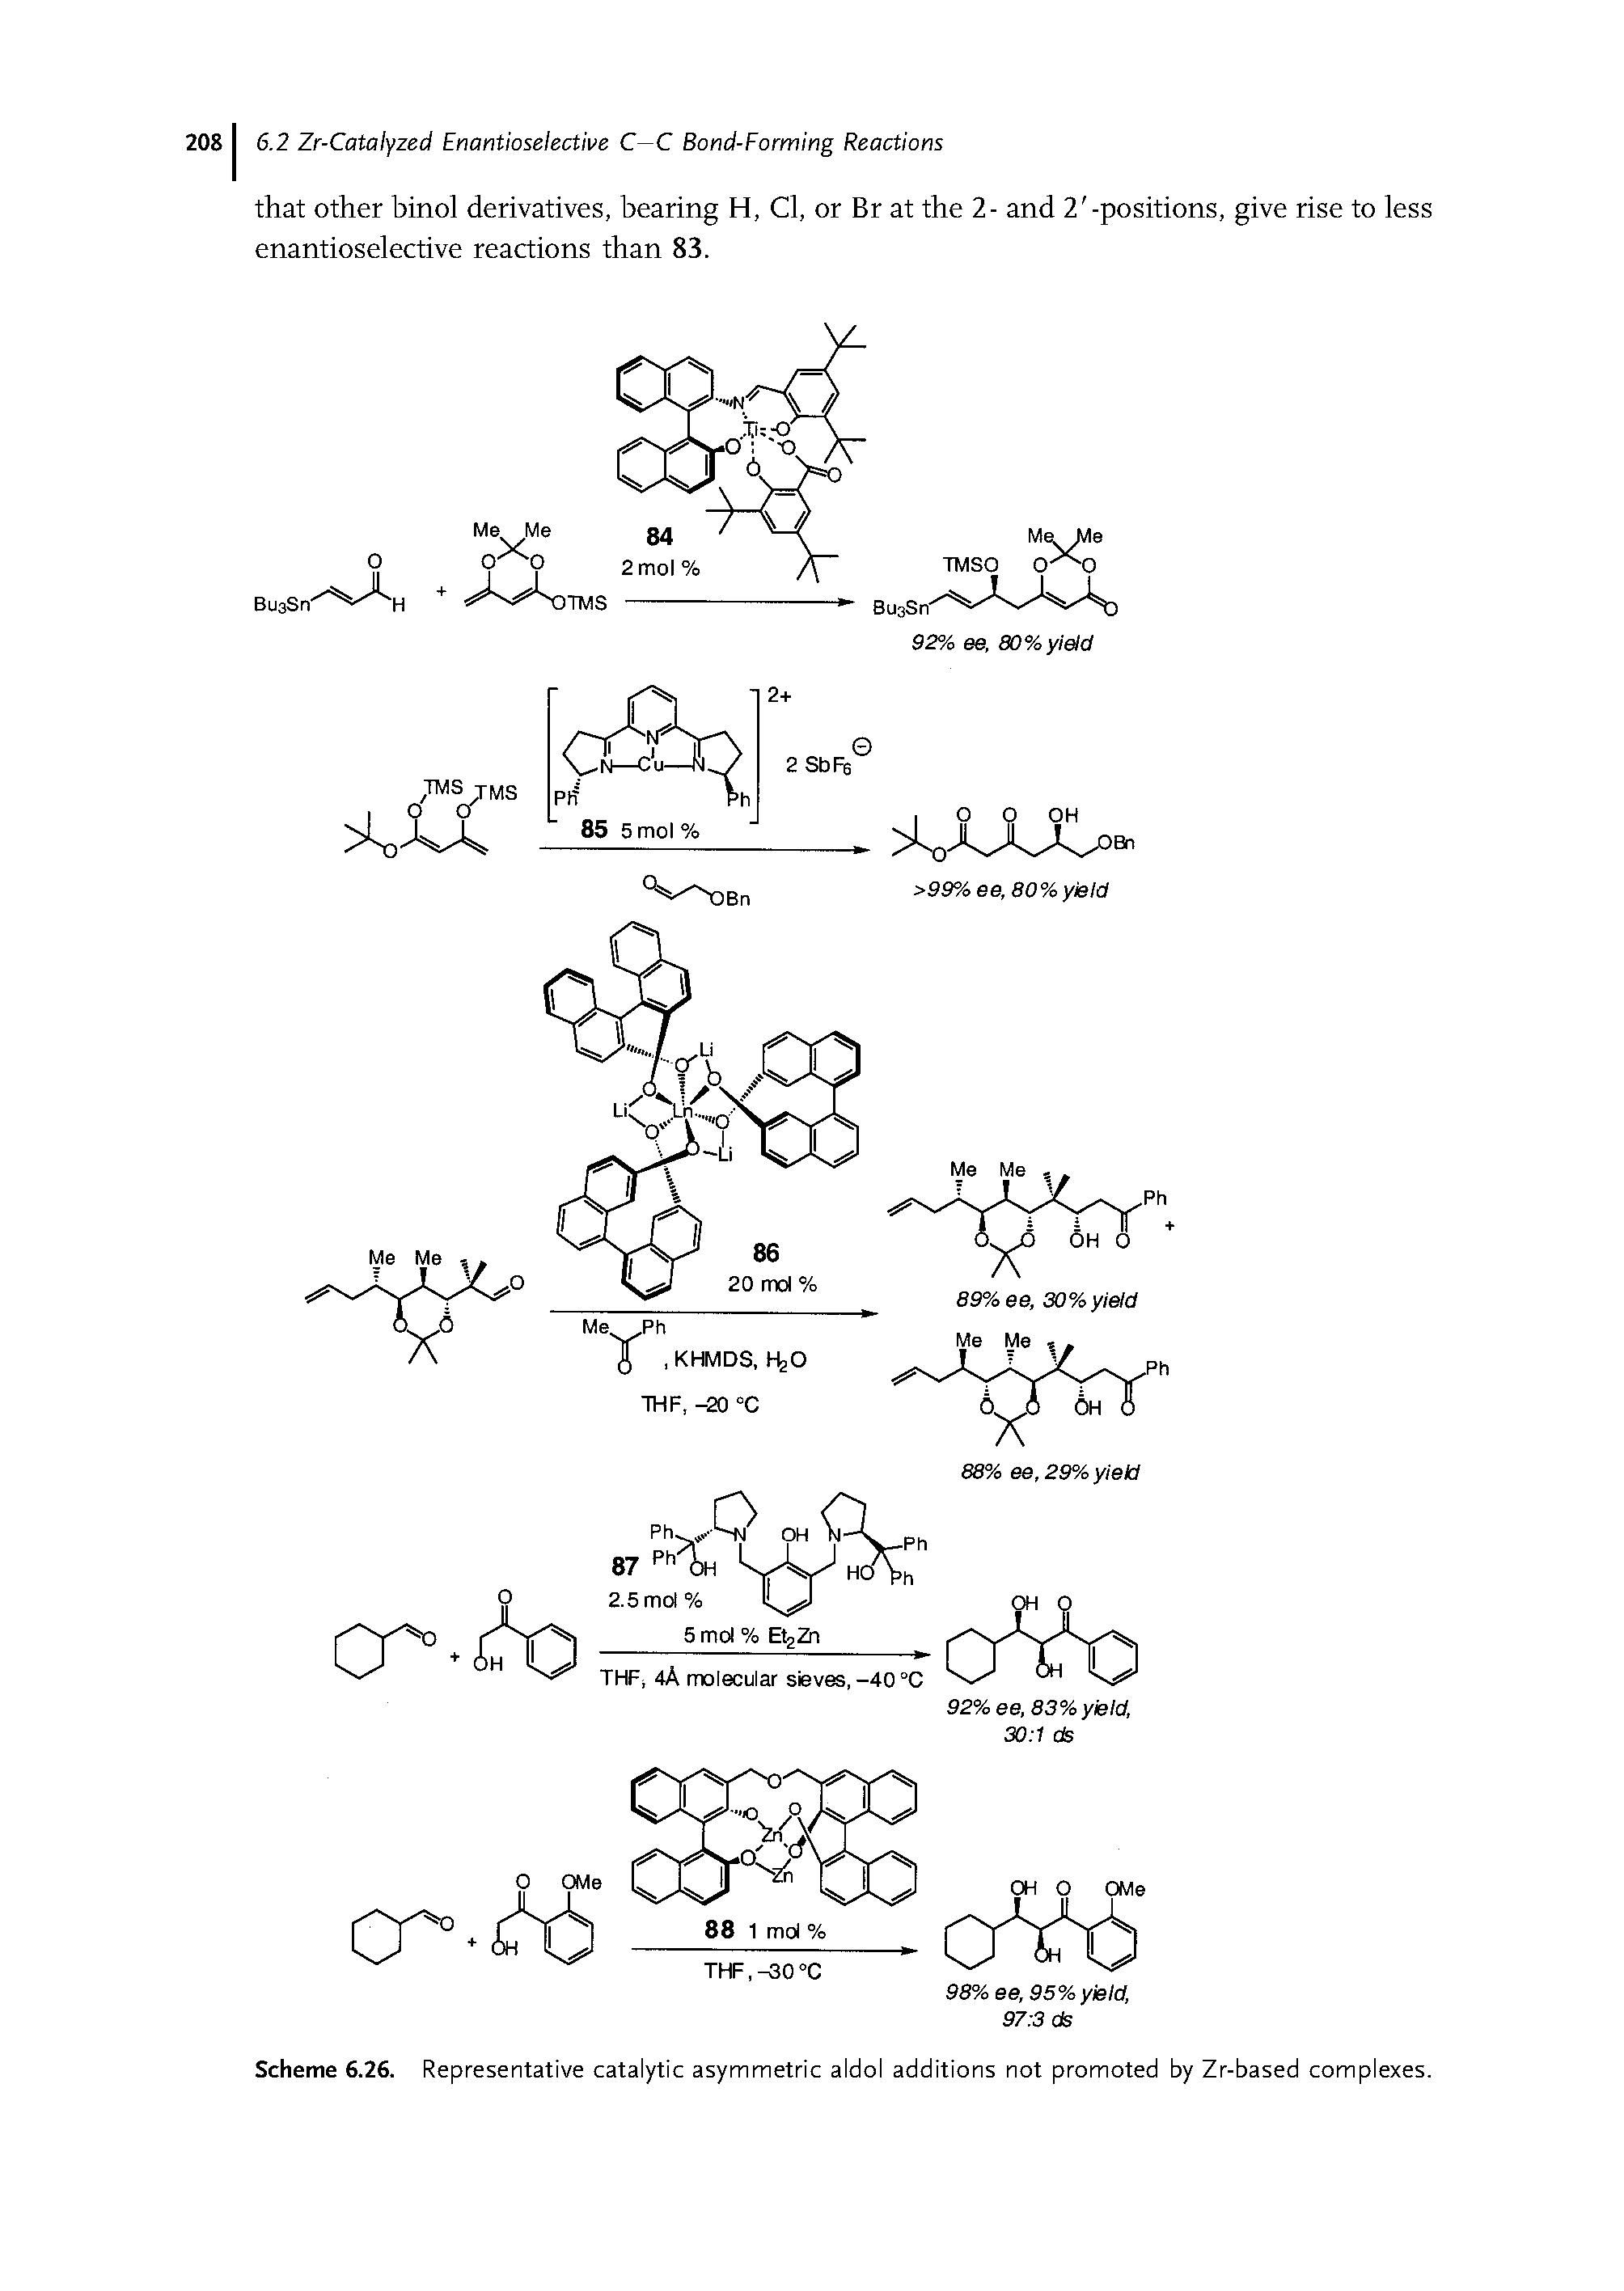 Scheme 6.26. Representative catalytic asymmetric aldol additions not promoted by Zr-based complexes.